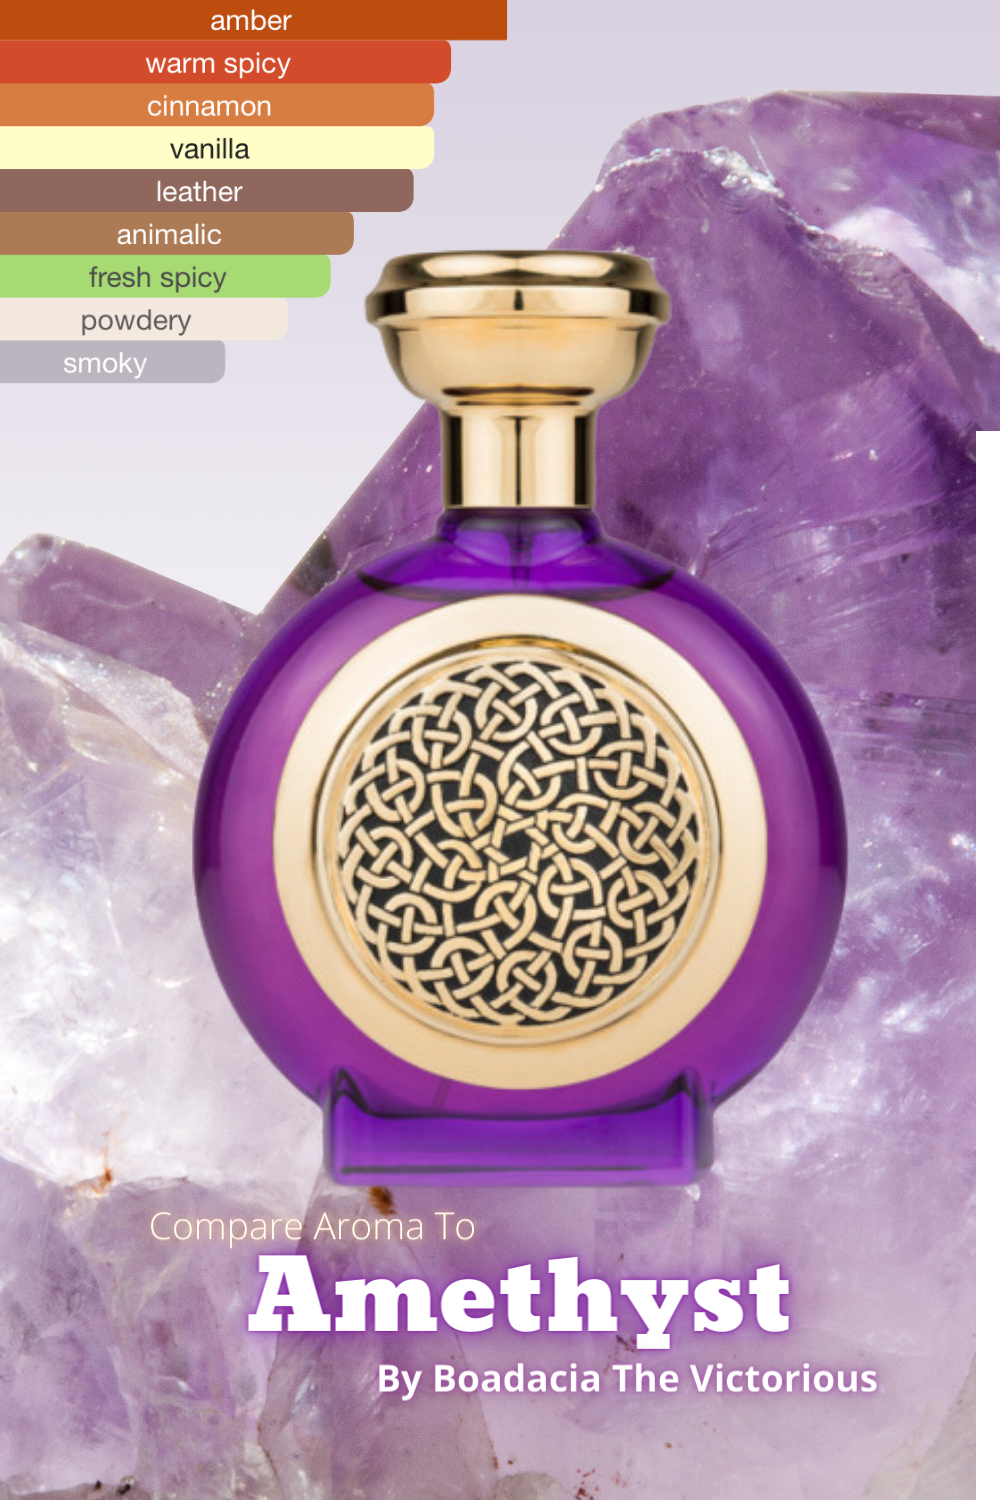 Compare Aroma To Amethyst®